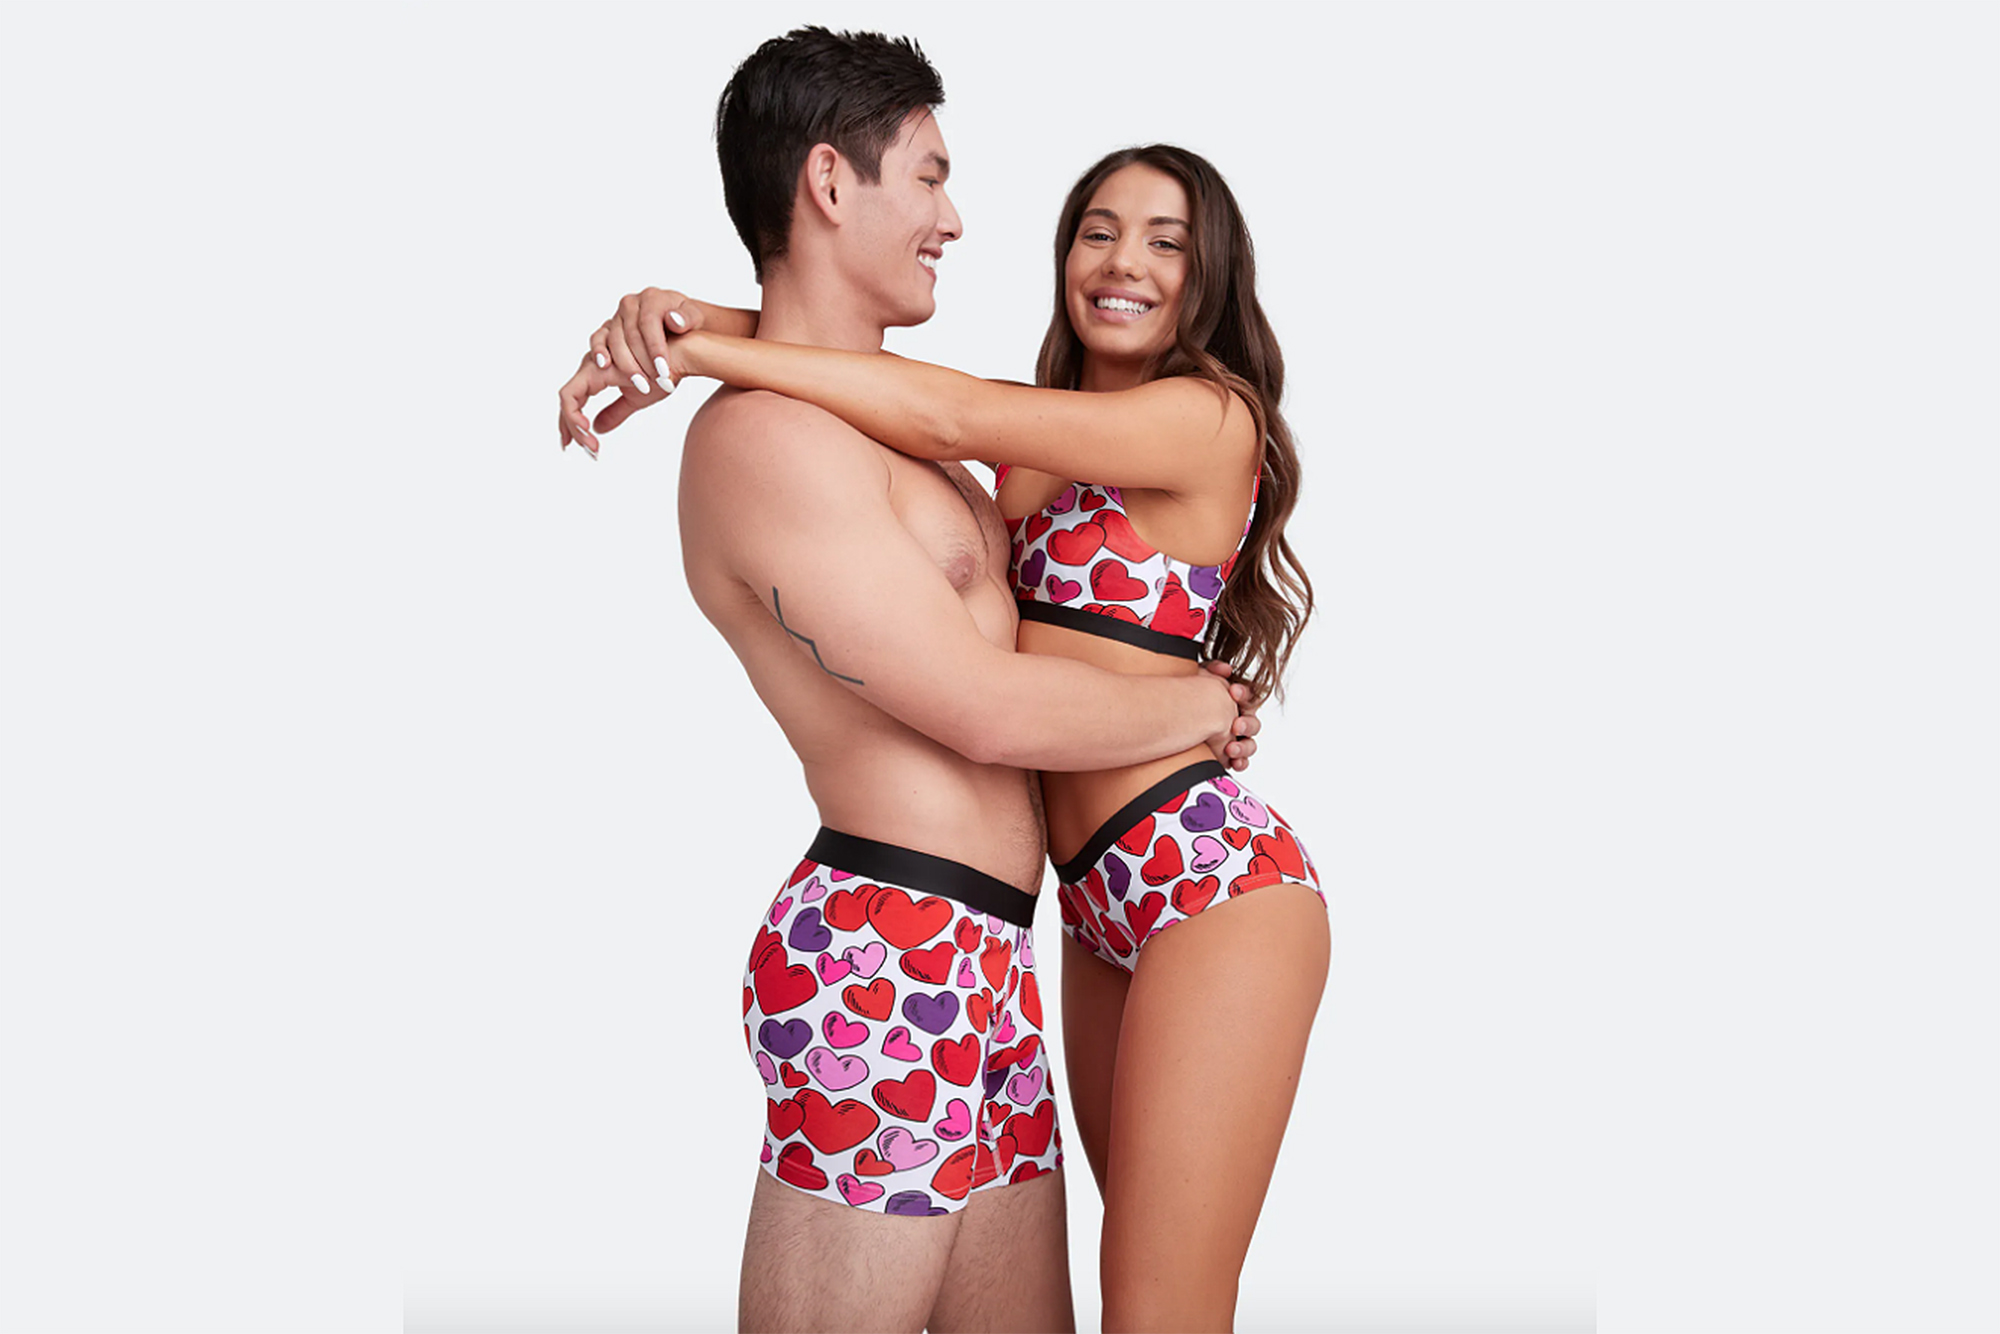 This Matching Underwear Is the Cutest Valentine's Day Gift Ever | Us Weekly